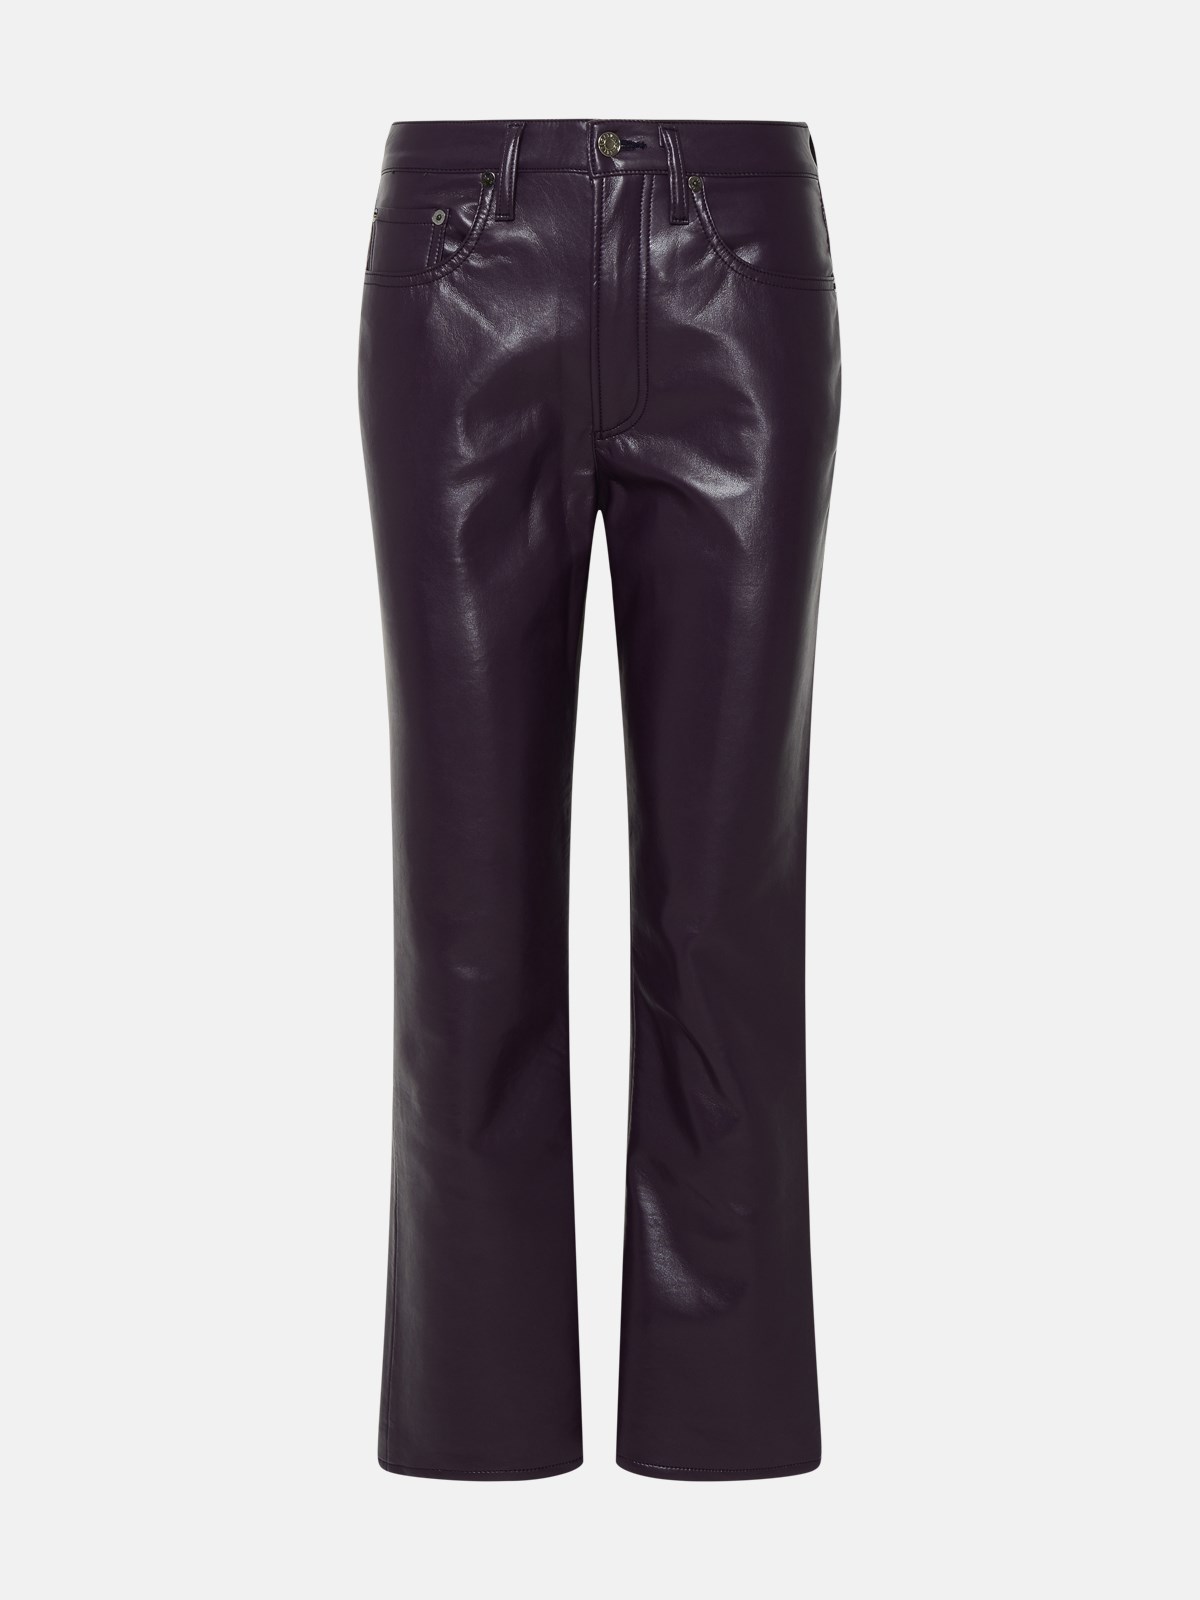 Agolde Burgundy Leather Riley Pants In Bordeaux